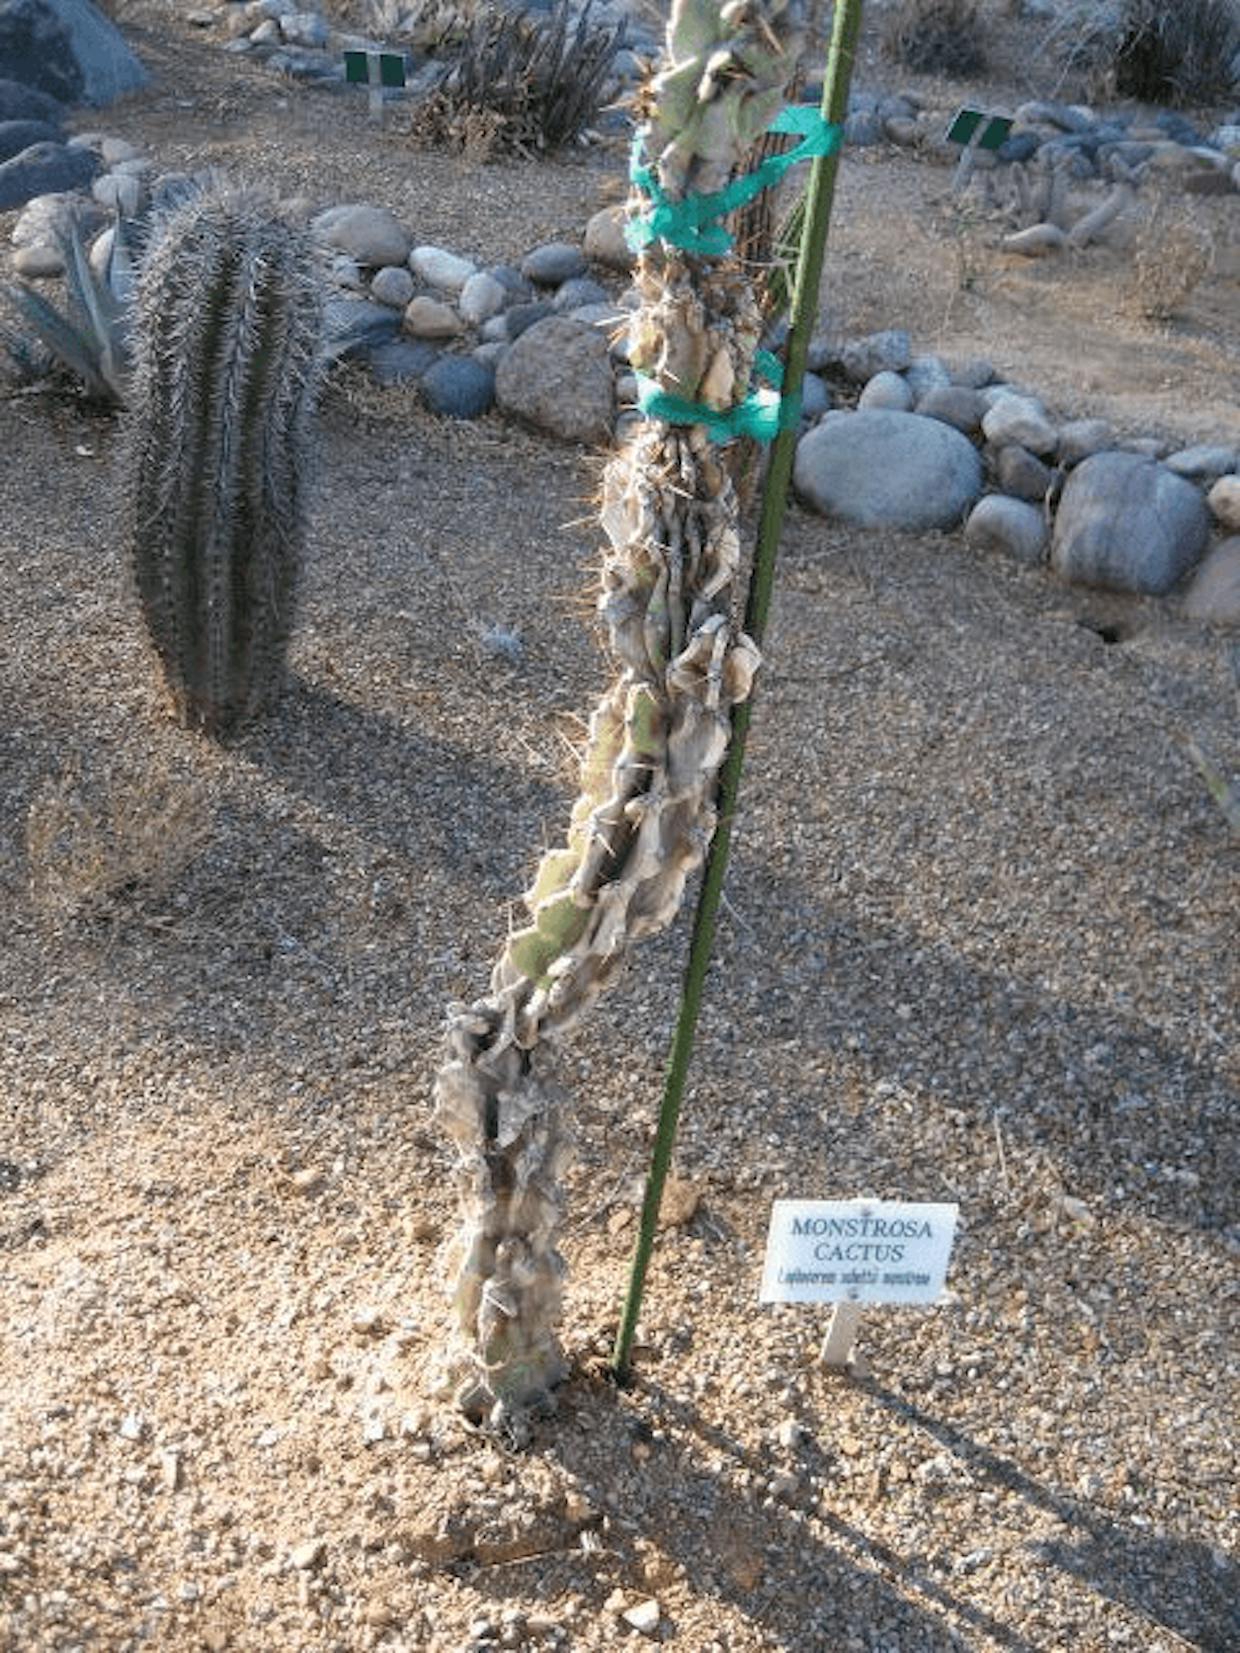 A badly damaged Monstrosa Cactus at The Arid Garden following an extensive cold spell in February, 2011. Note the vibrant Saguaro in the background. (Mary Kidnocker photo)